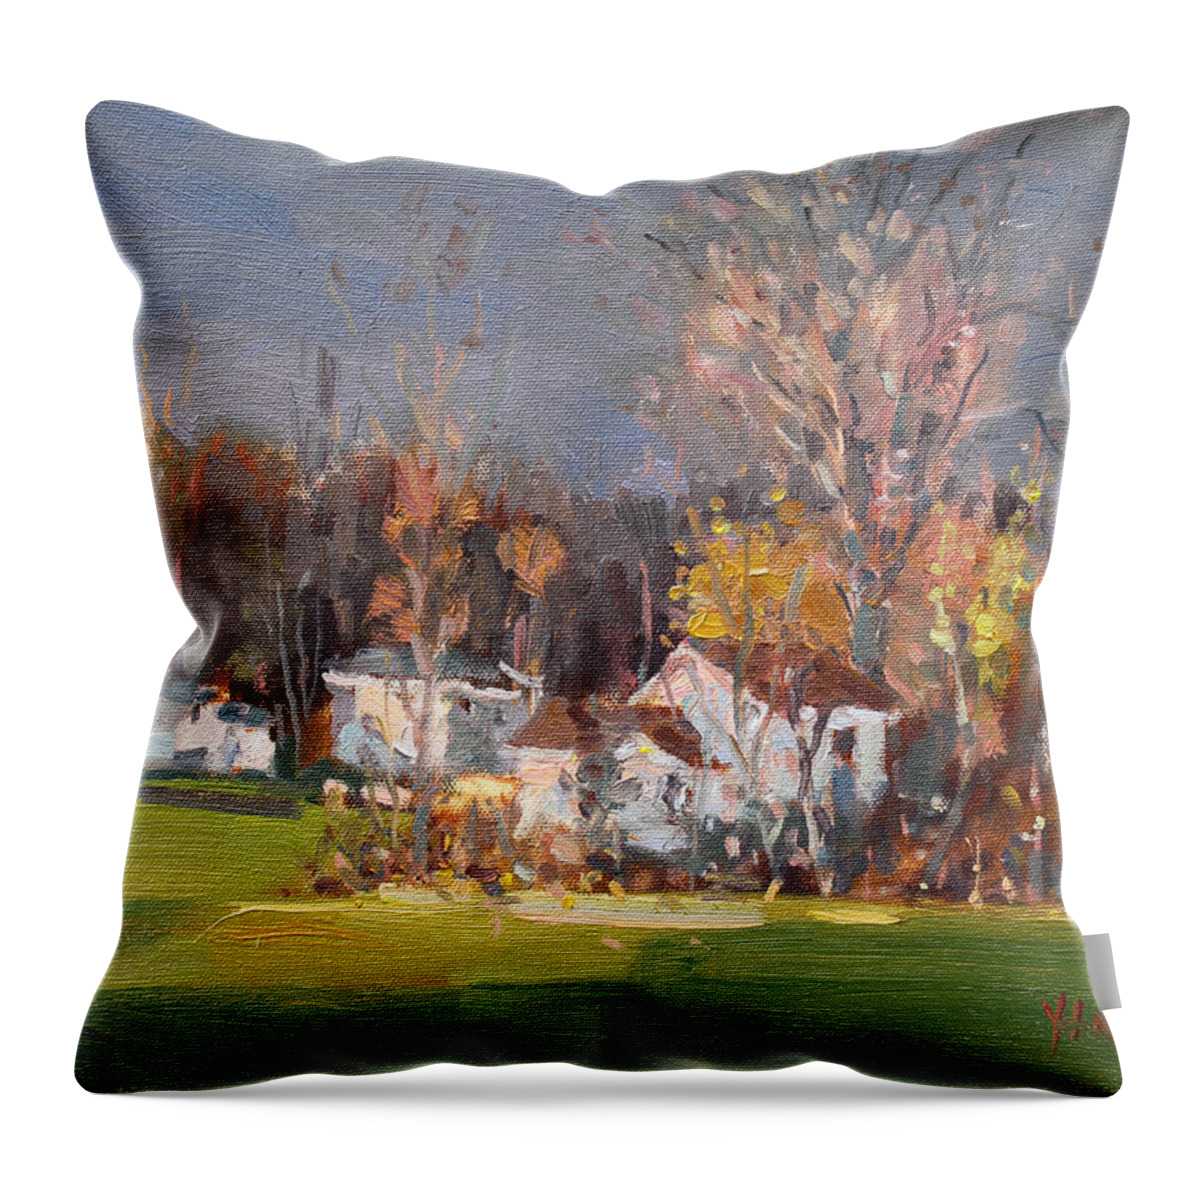 Sunset Light Throw Pillow featuring the painting Sunset Light by Ylli Haruni